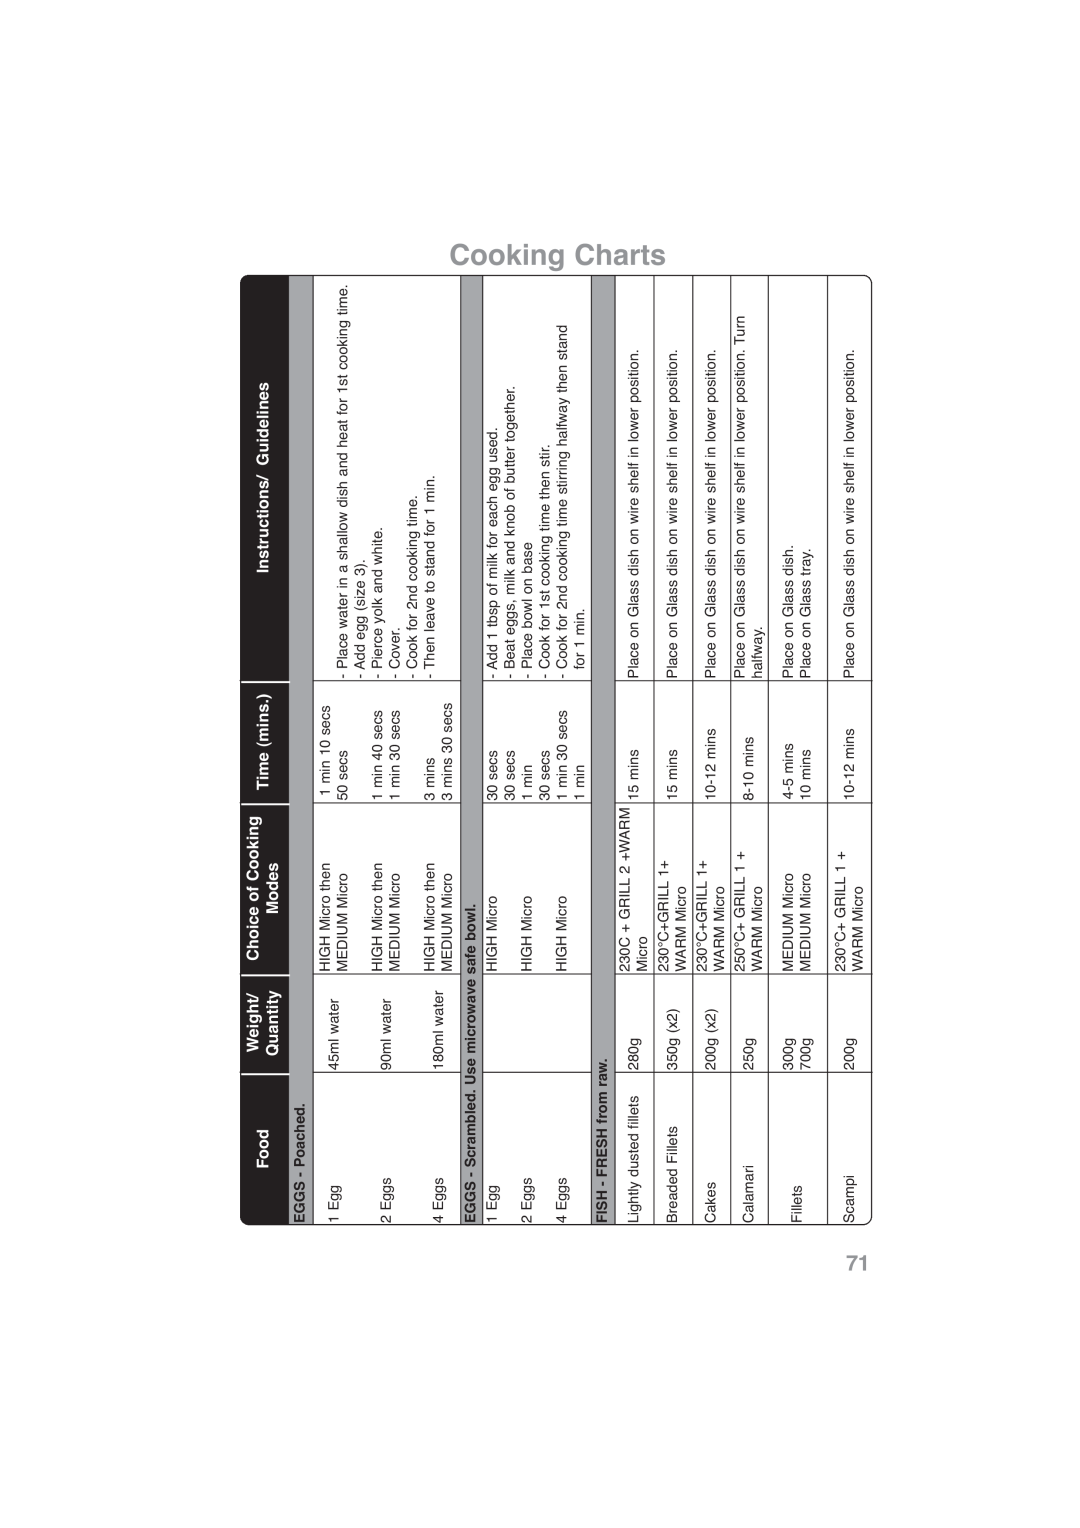 Panasonic NN-CF778S Cooking Charts, Food, Weight, Choice of Cooking, Time mins, Instructions/ Guidelines, Quantity, Modes 